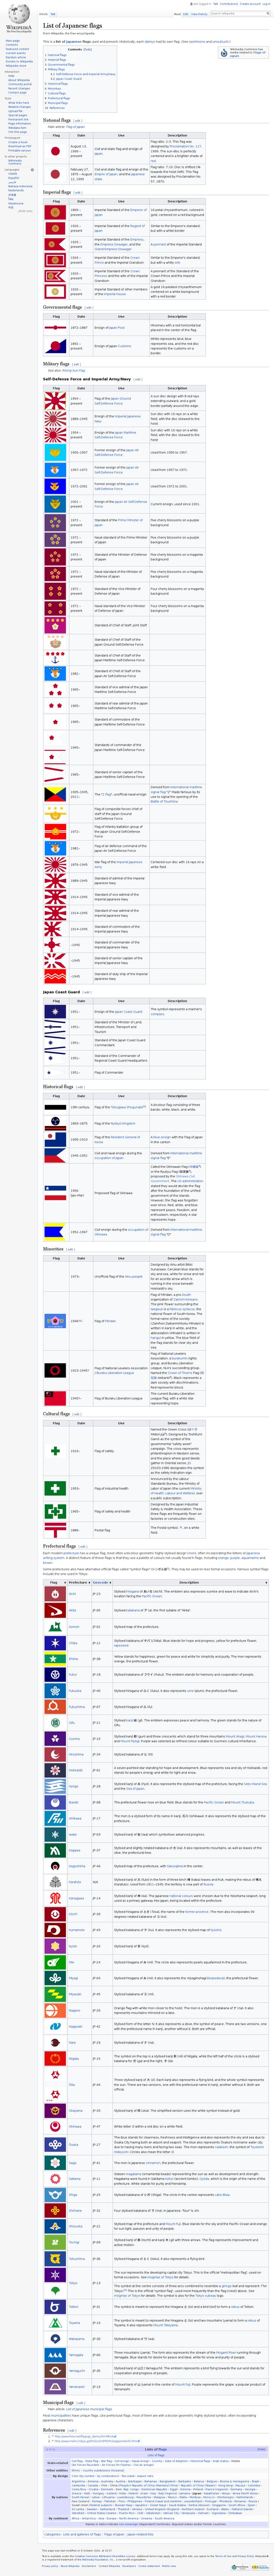 List of Japanese flags - Wikipedia